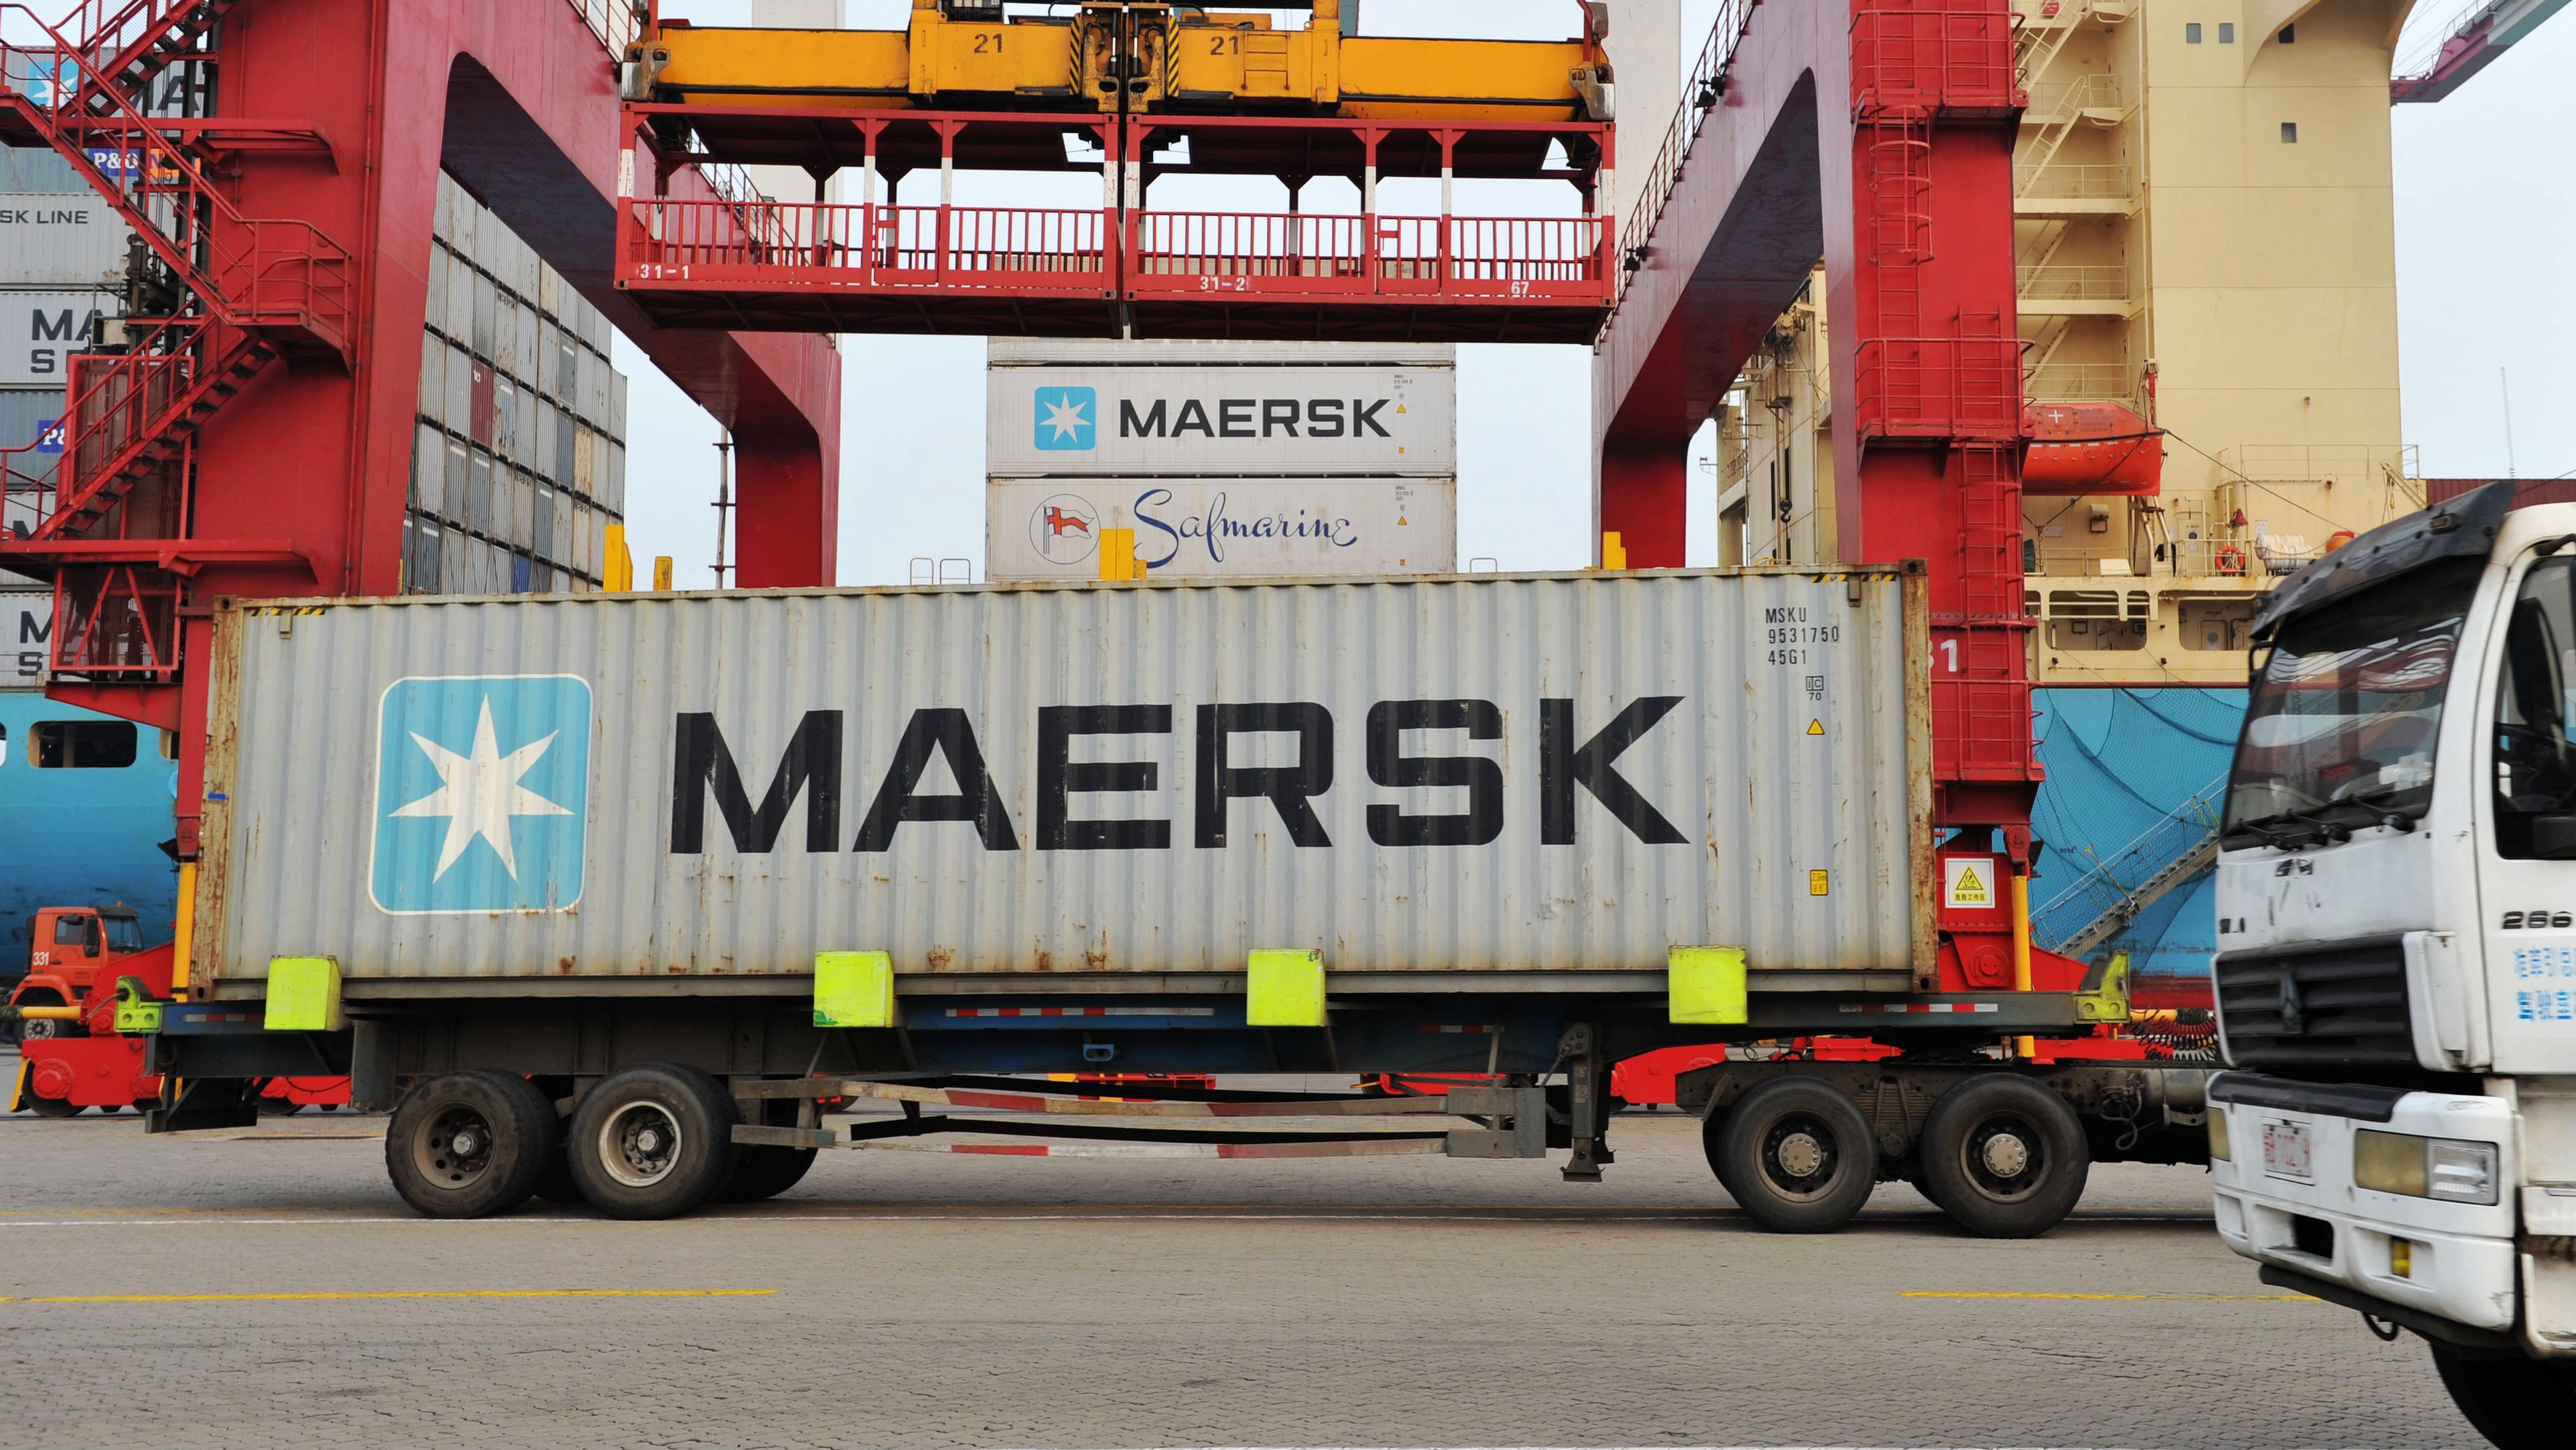 vitality To read Rarity Maersk suspends shipping container deliveries to, from Russia | Fox Business